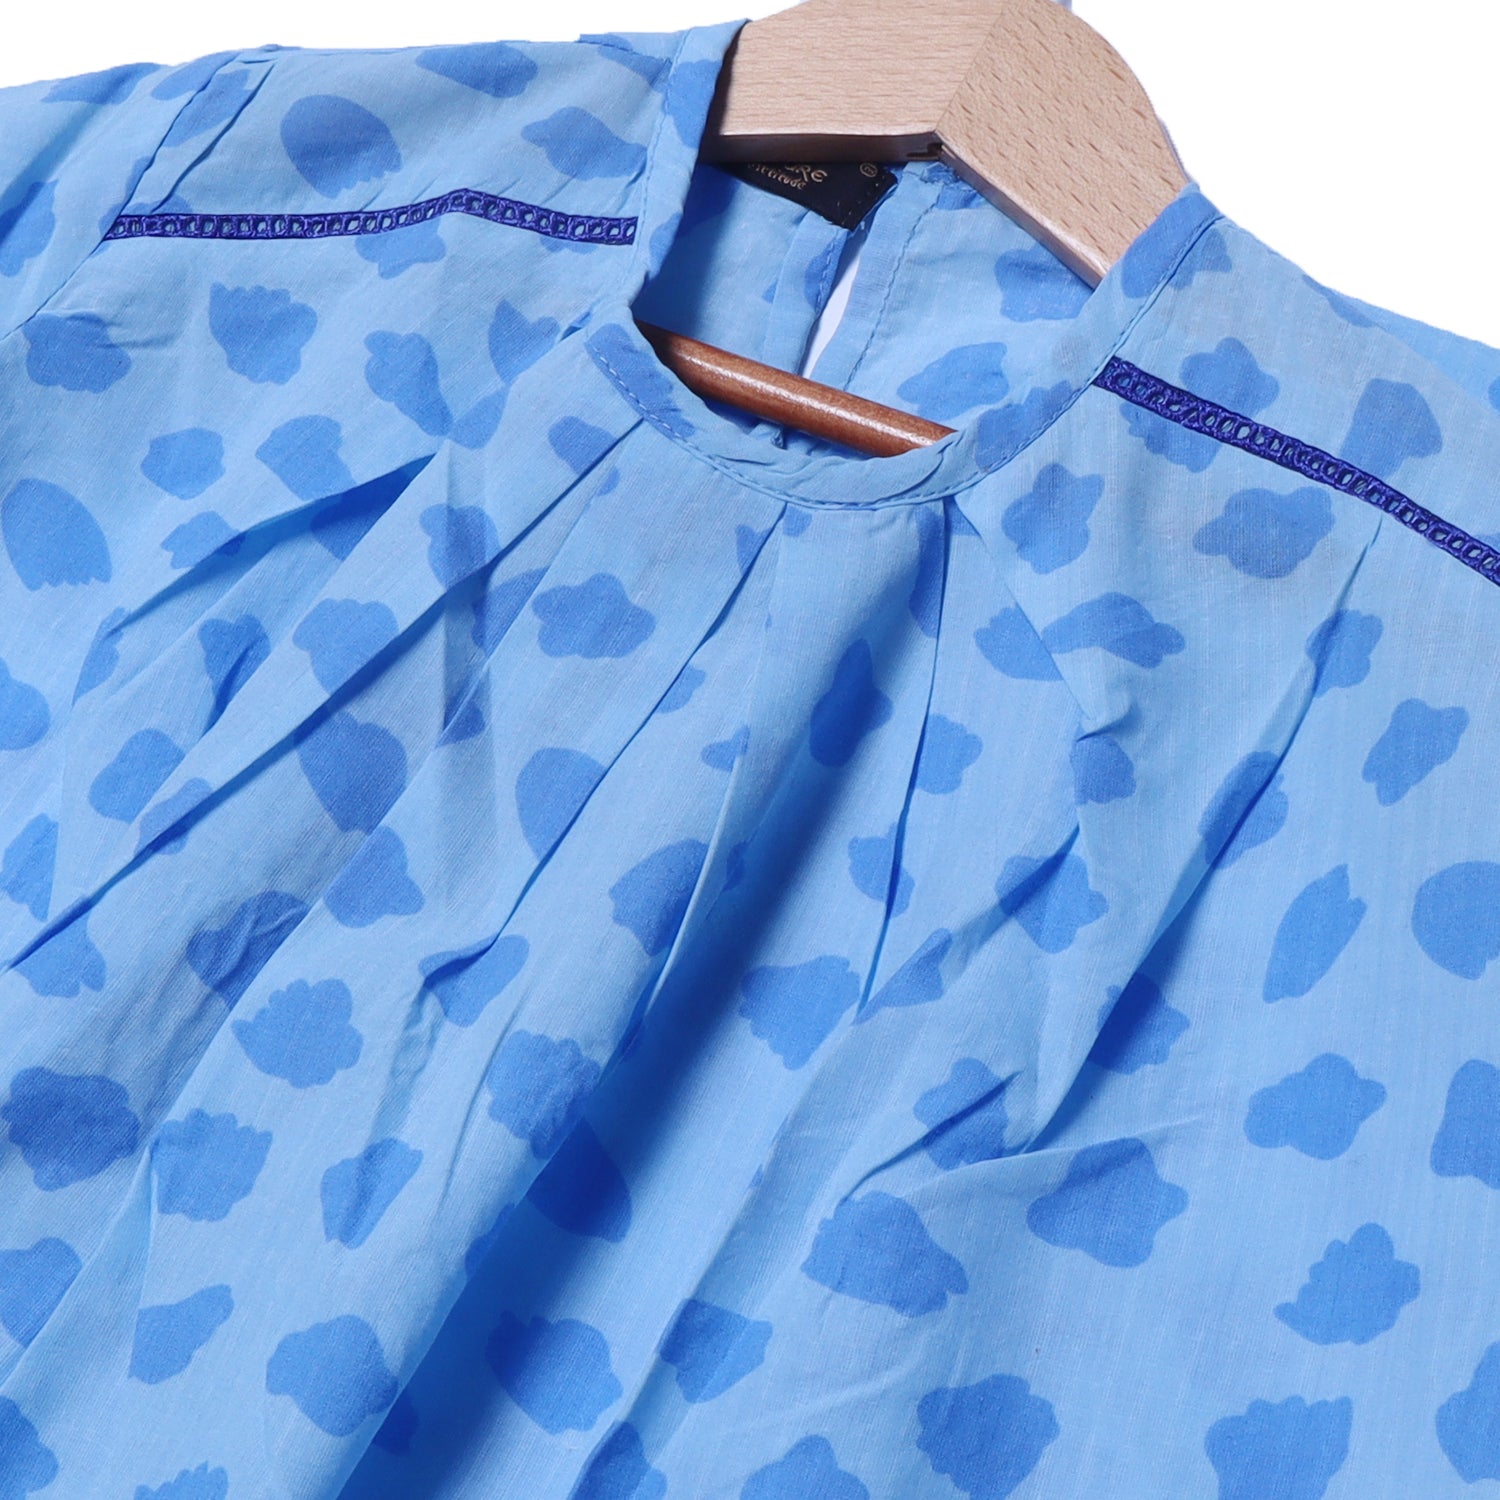 SKY BLUE WITH BLUE SPOTS PRINTED TOP FROCK FOR GIRLS